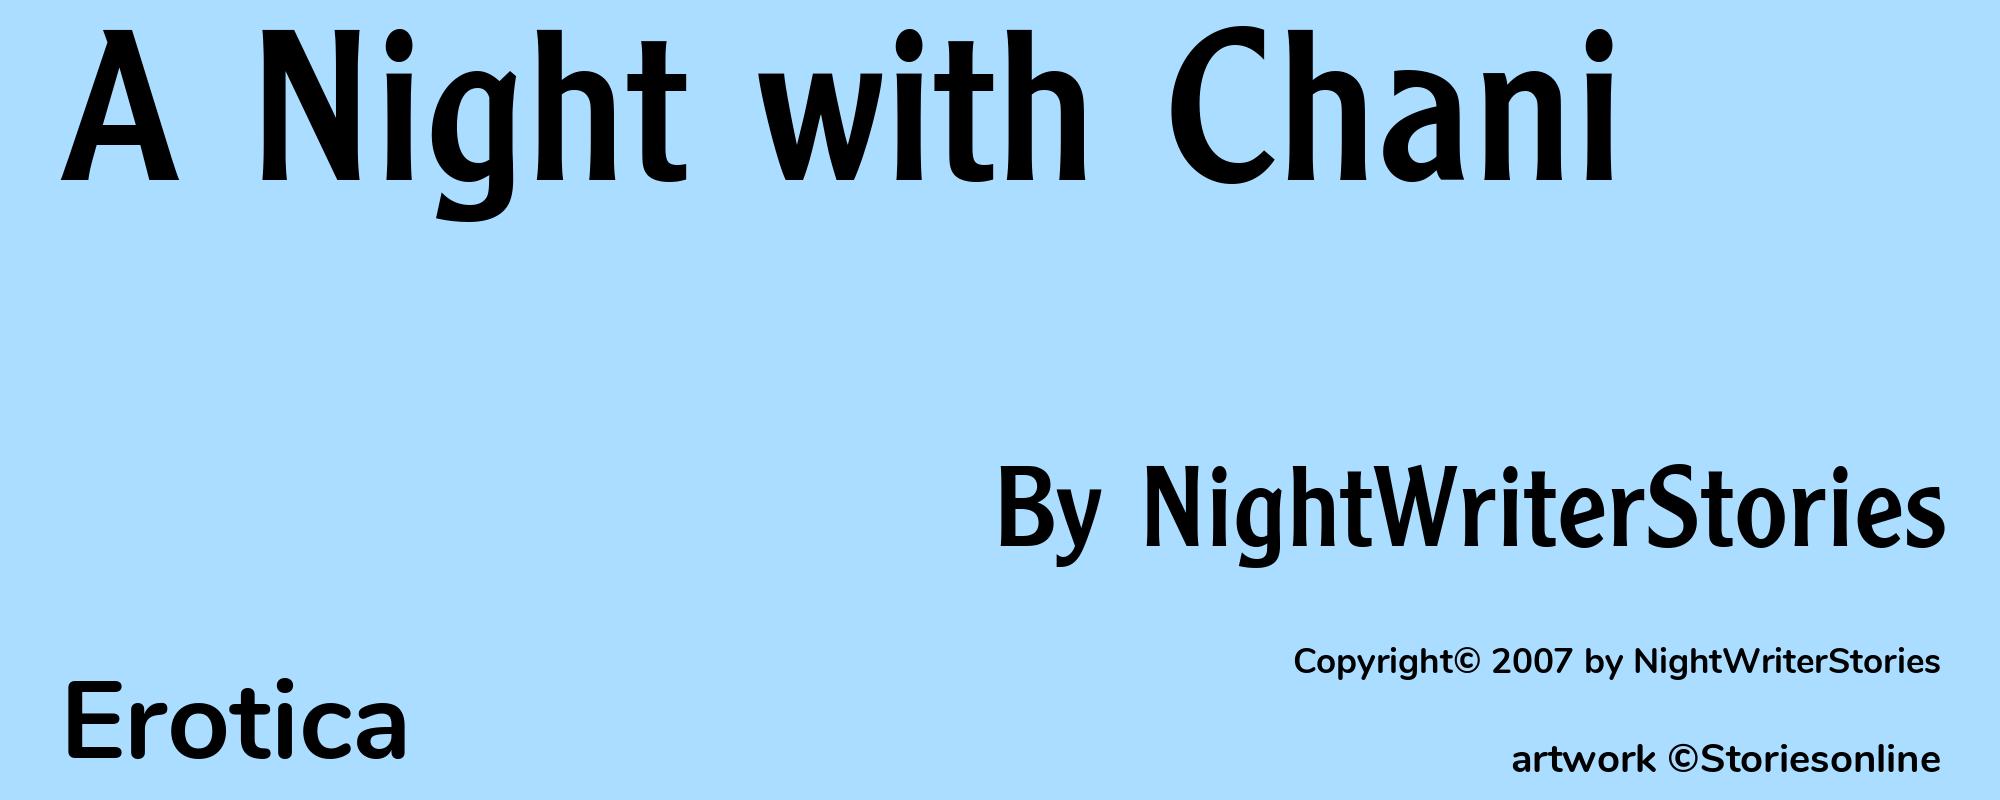 A Night with Chani - Cover